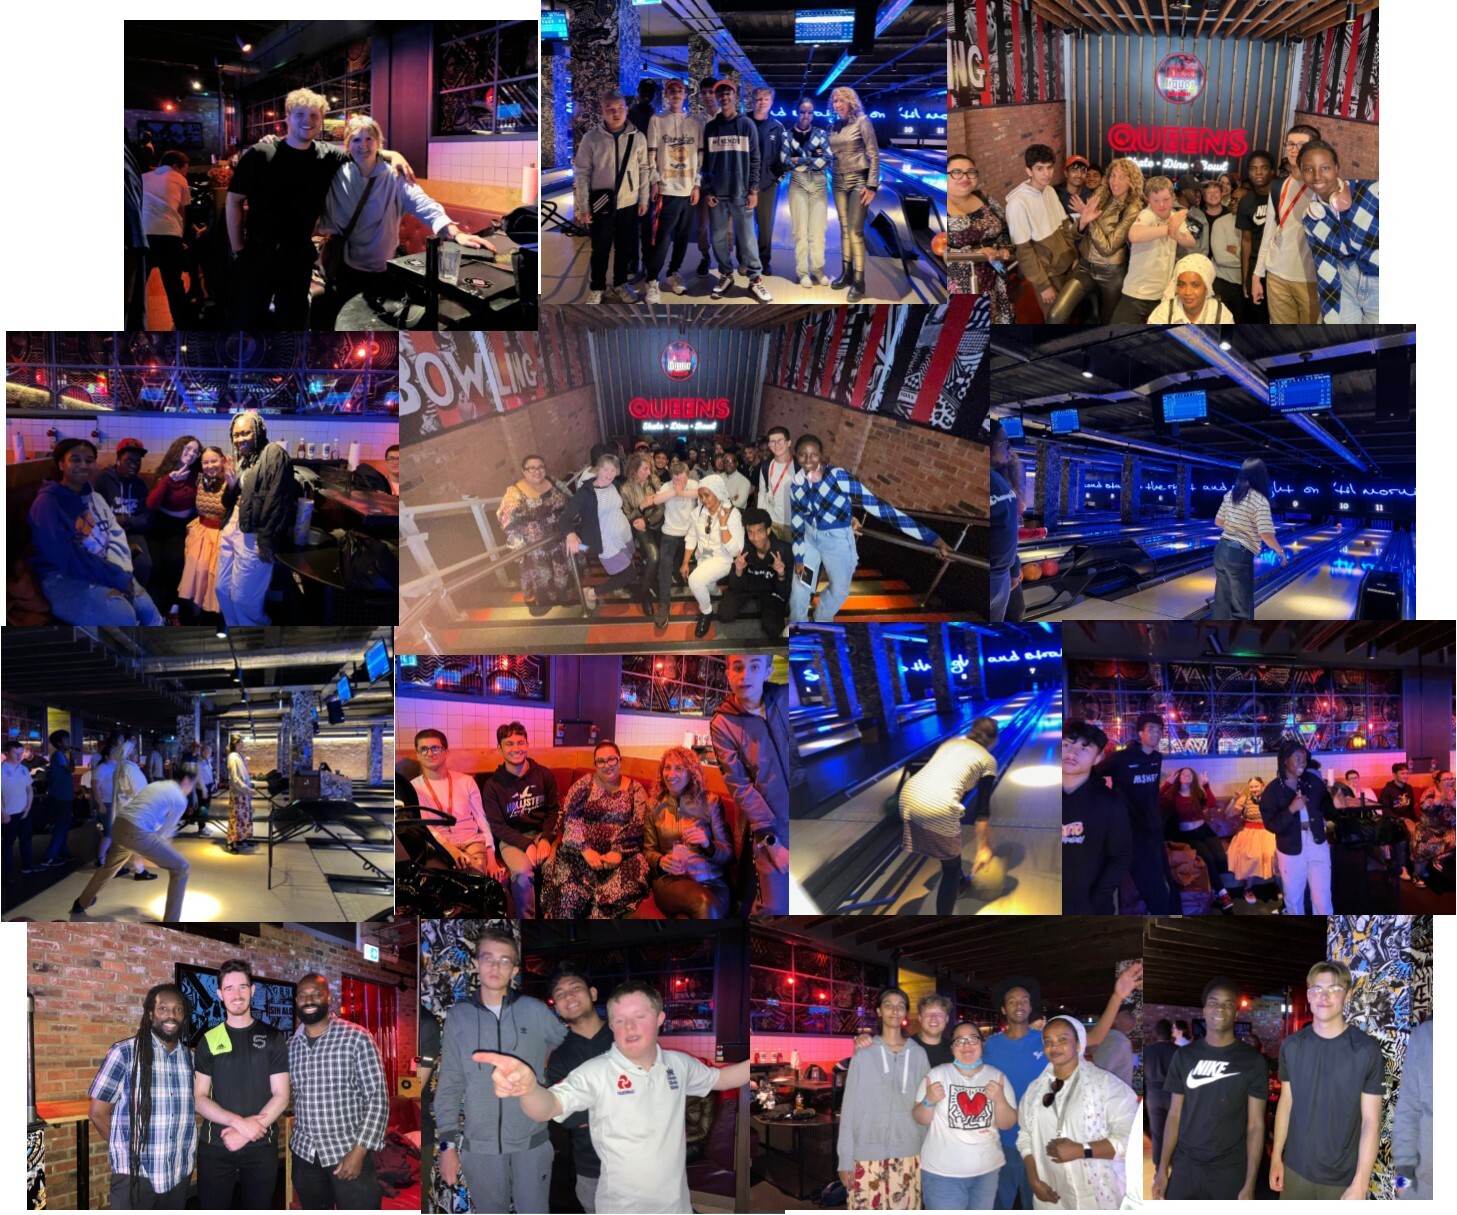 BOWLING COLLAGE